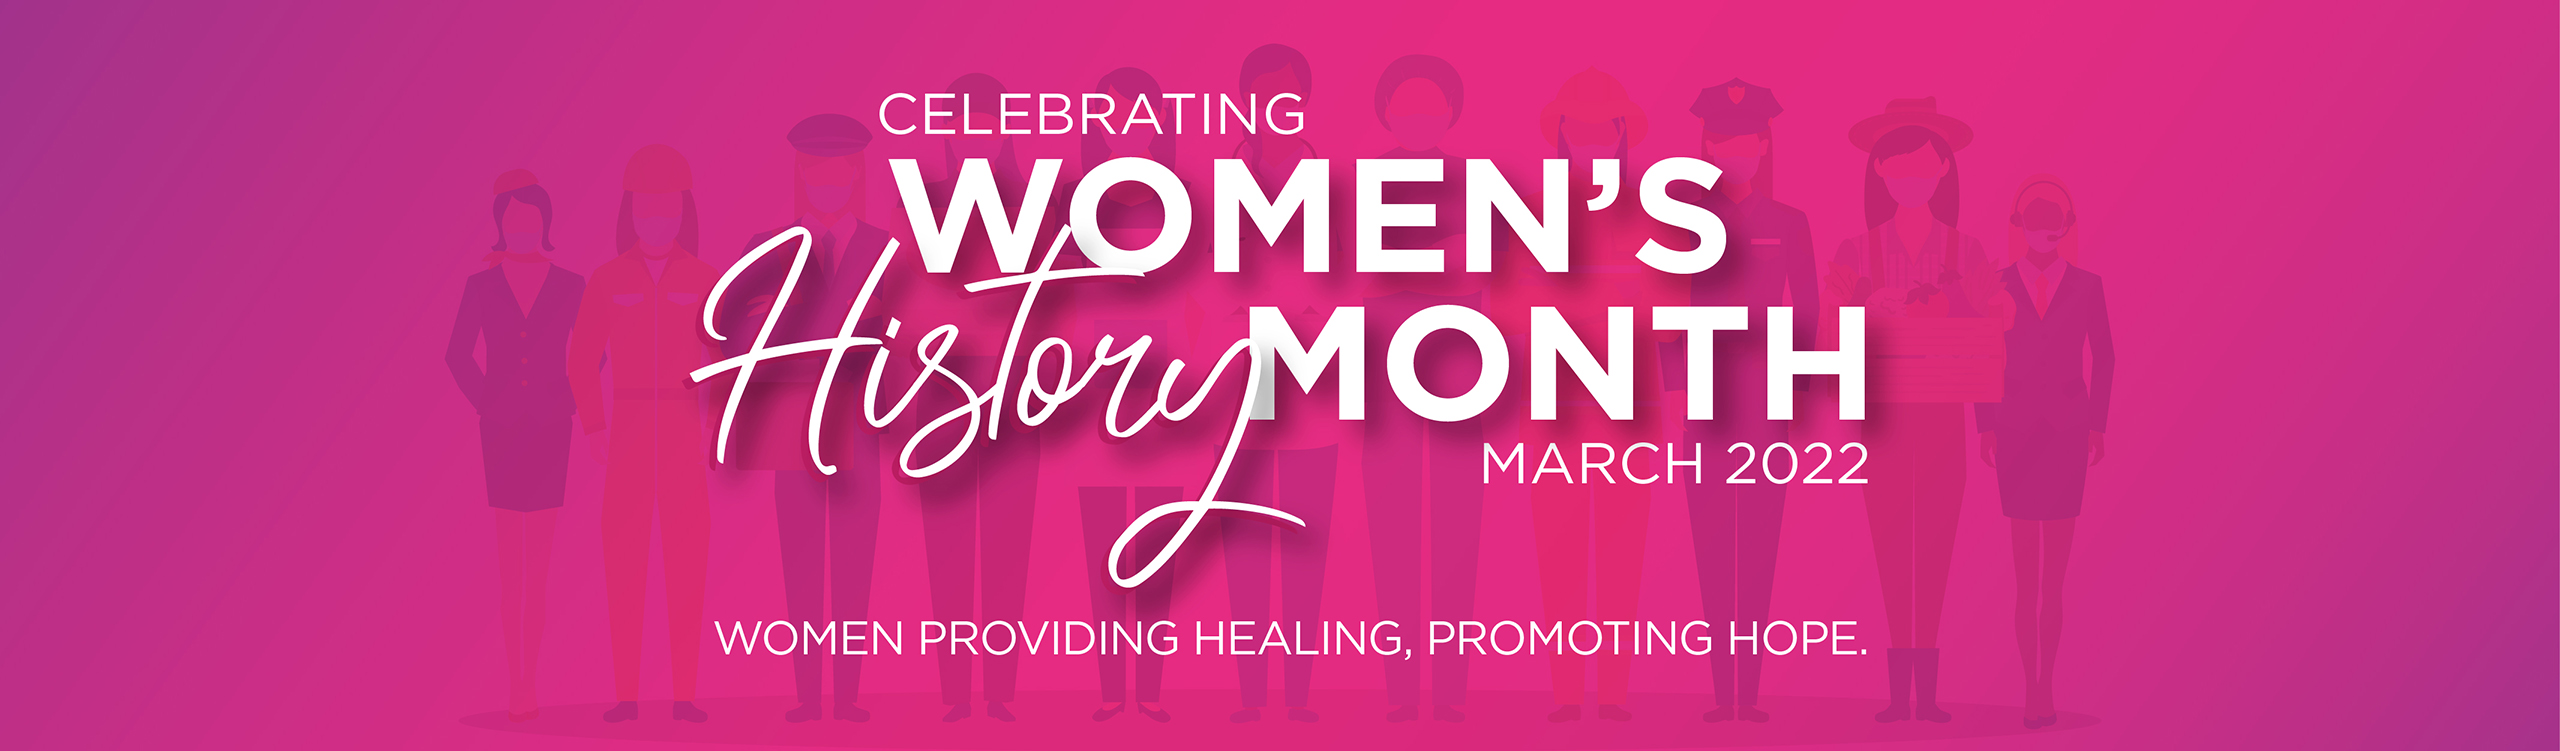 Celebrating Women's History Month, March 2022: Women providing healing, promoting hope